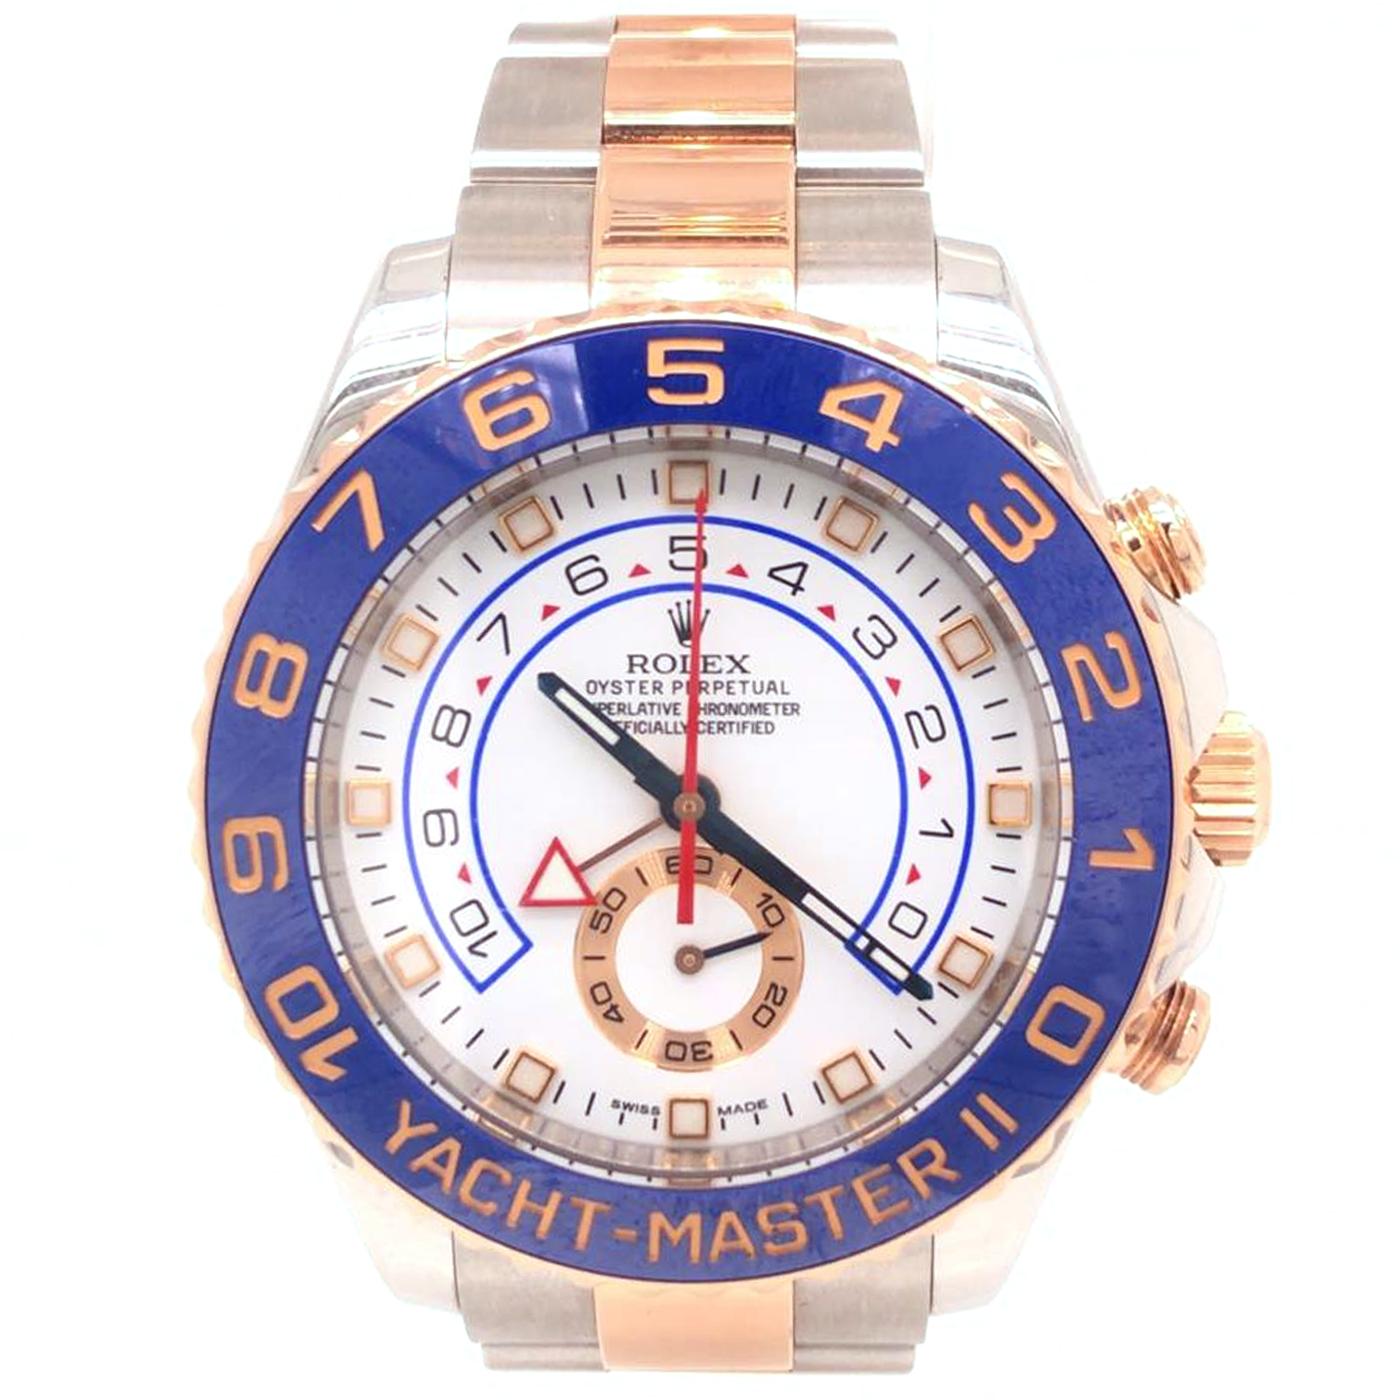 The Oyster Perpetual Yacht-Master II in Oystersteel with an Oyster bracelet and a bidirectional rotatable bezel with a blue Cerachrom insert. The only chronograph in the world with a mechanical memory, the Yacht-Master II with its bezel acting as a